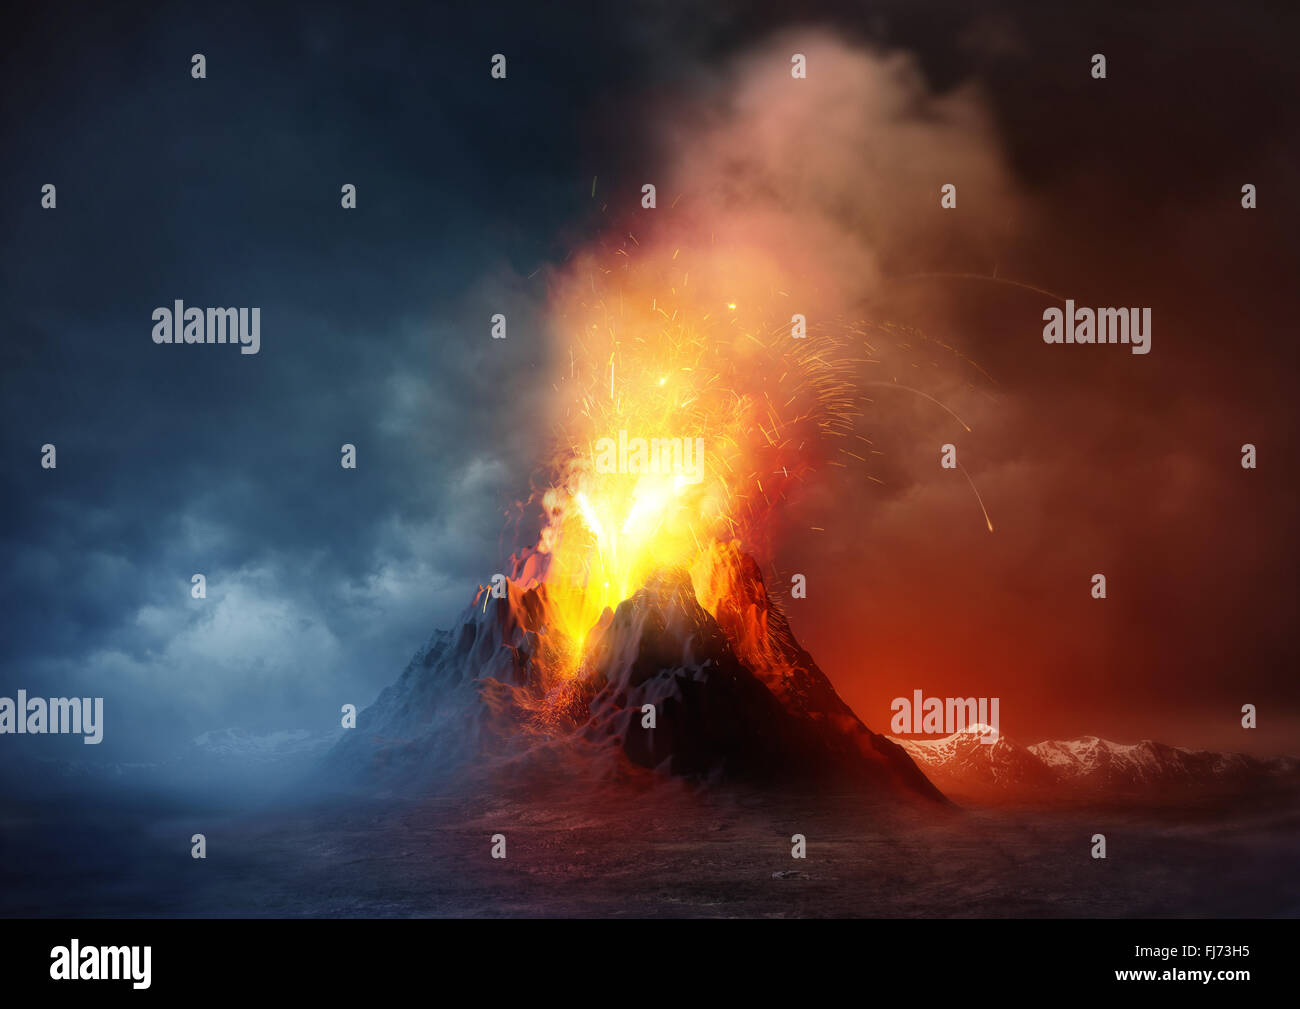 Volcano Eruption. A large volcano erupting hot lava and gases into the atmosphere. Illustration. Stock Photo